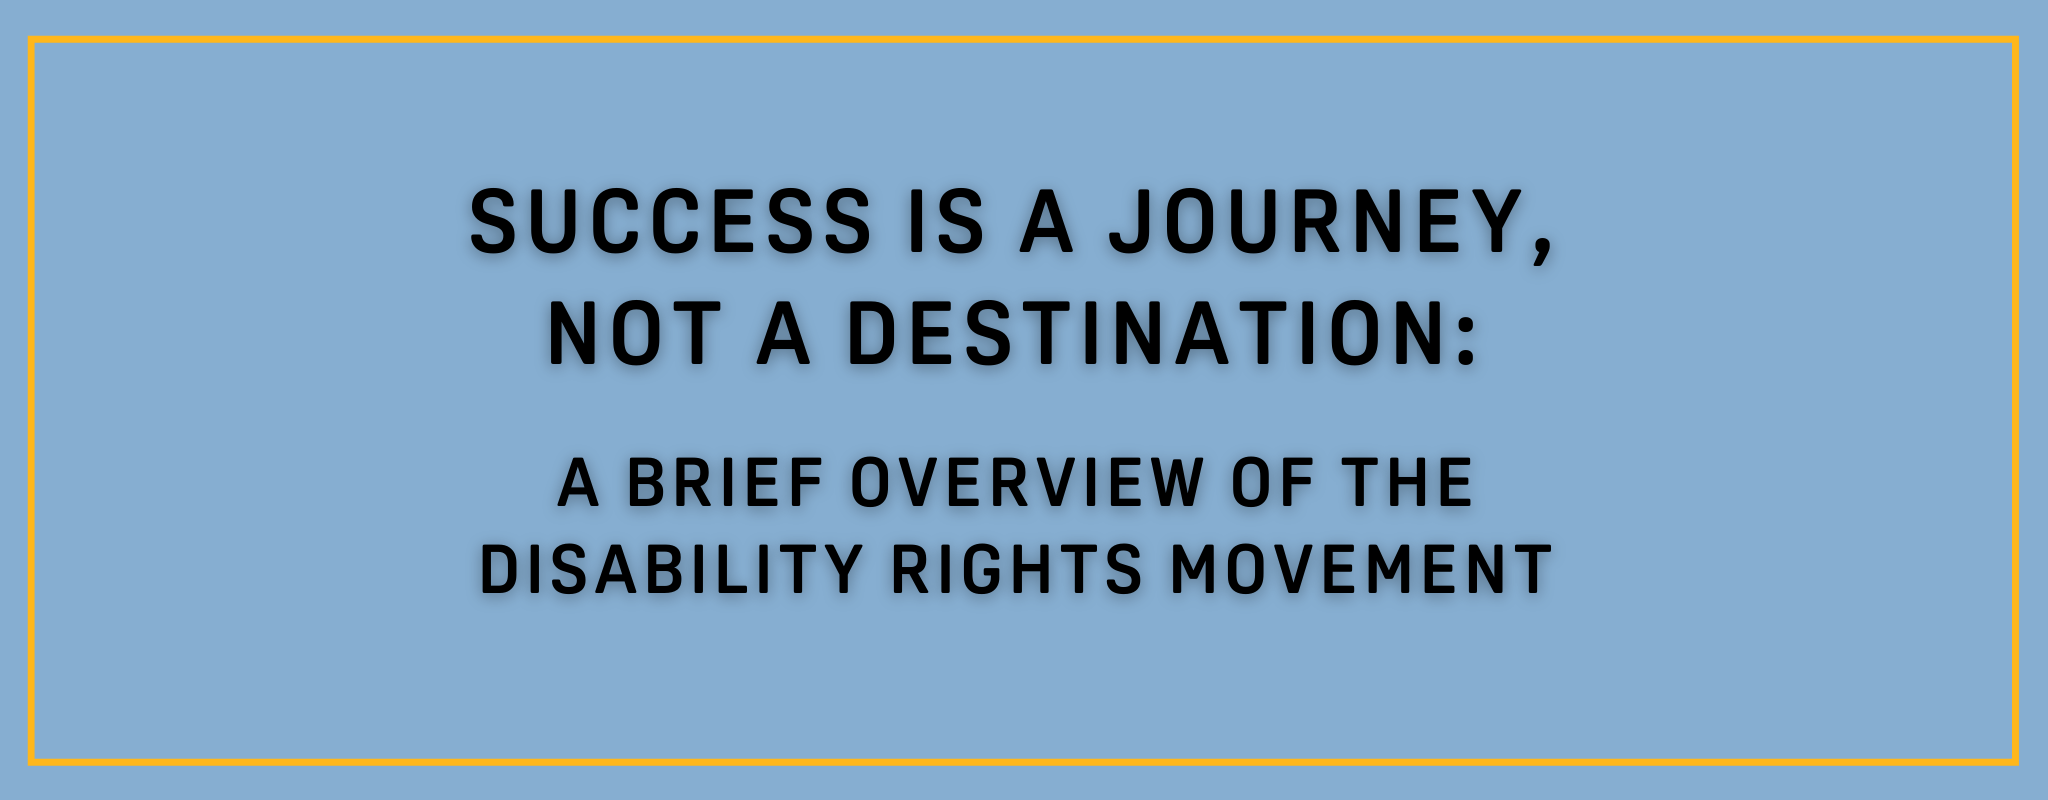 Success Is a Journey, Not a Destination: A Brief Overview of the Disability Rights Movement